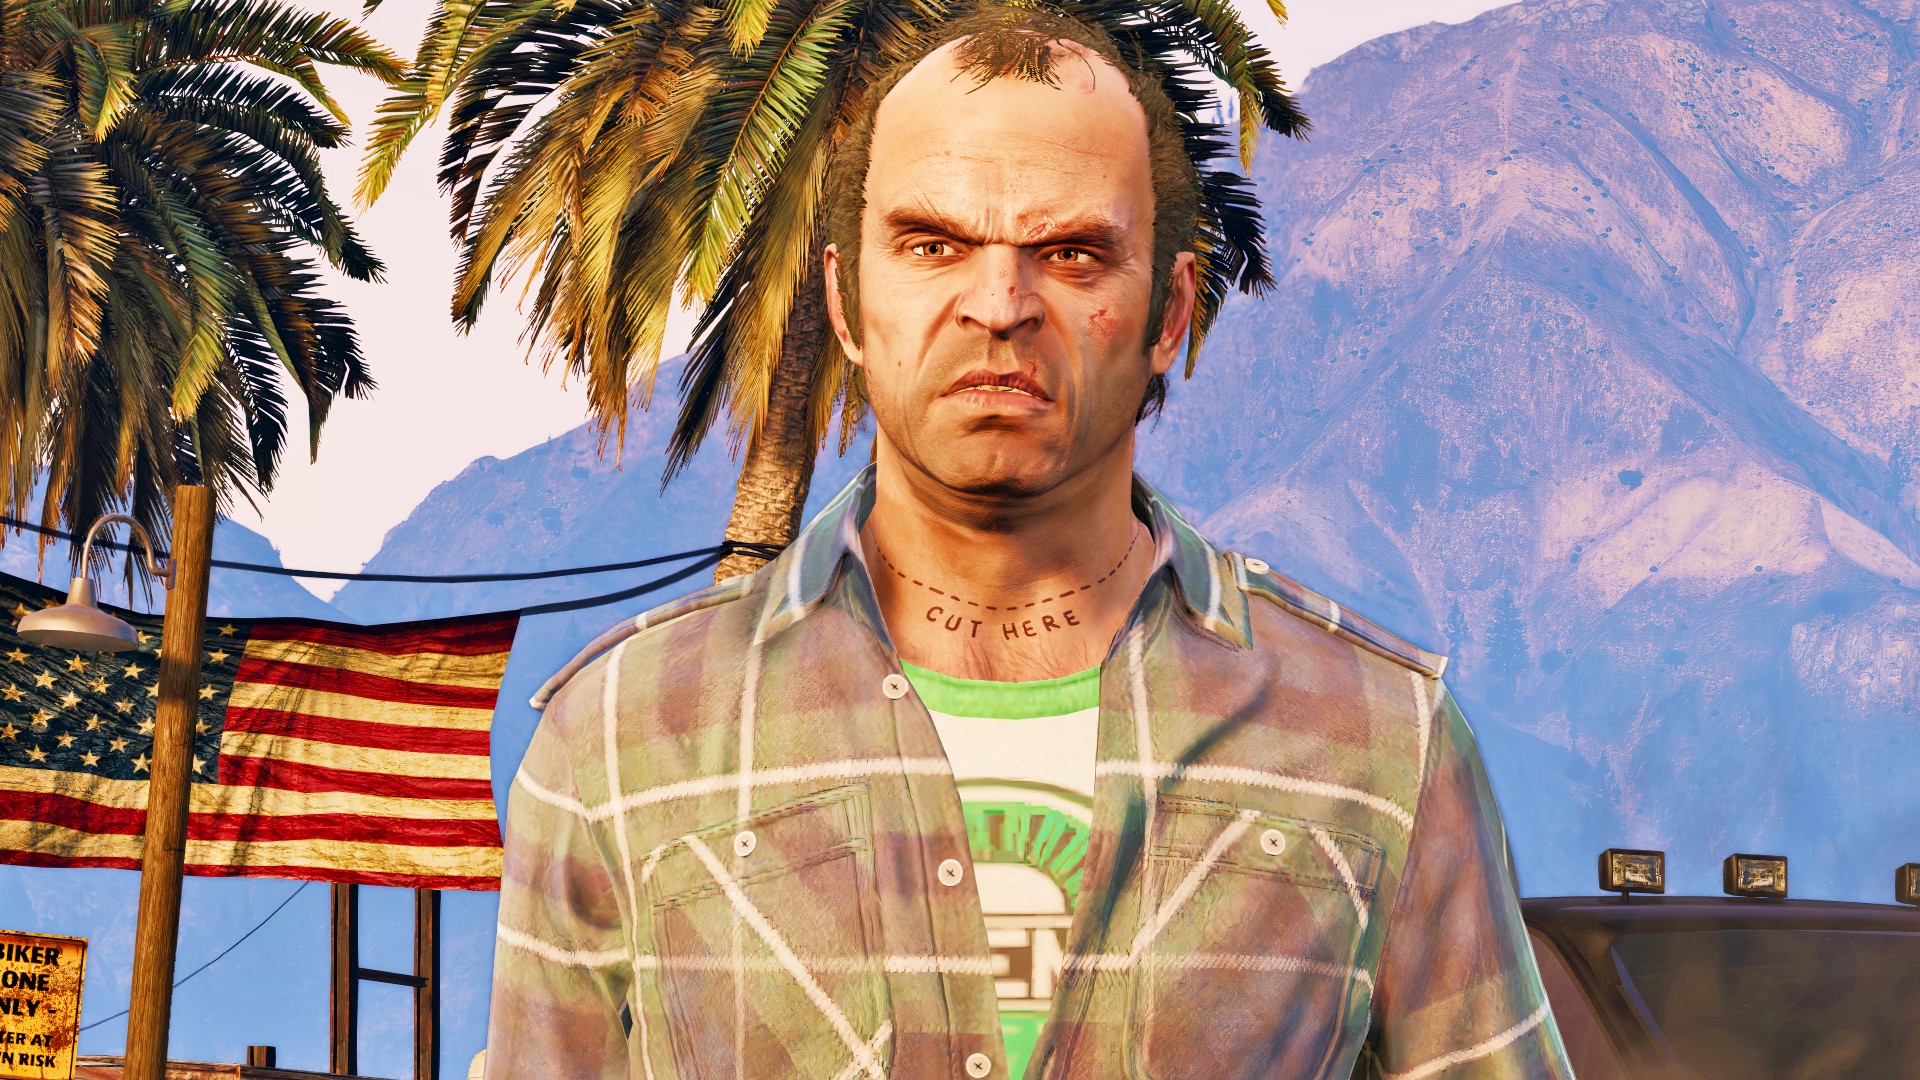 How to join GTA 5 RP servers in 2022